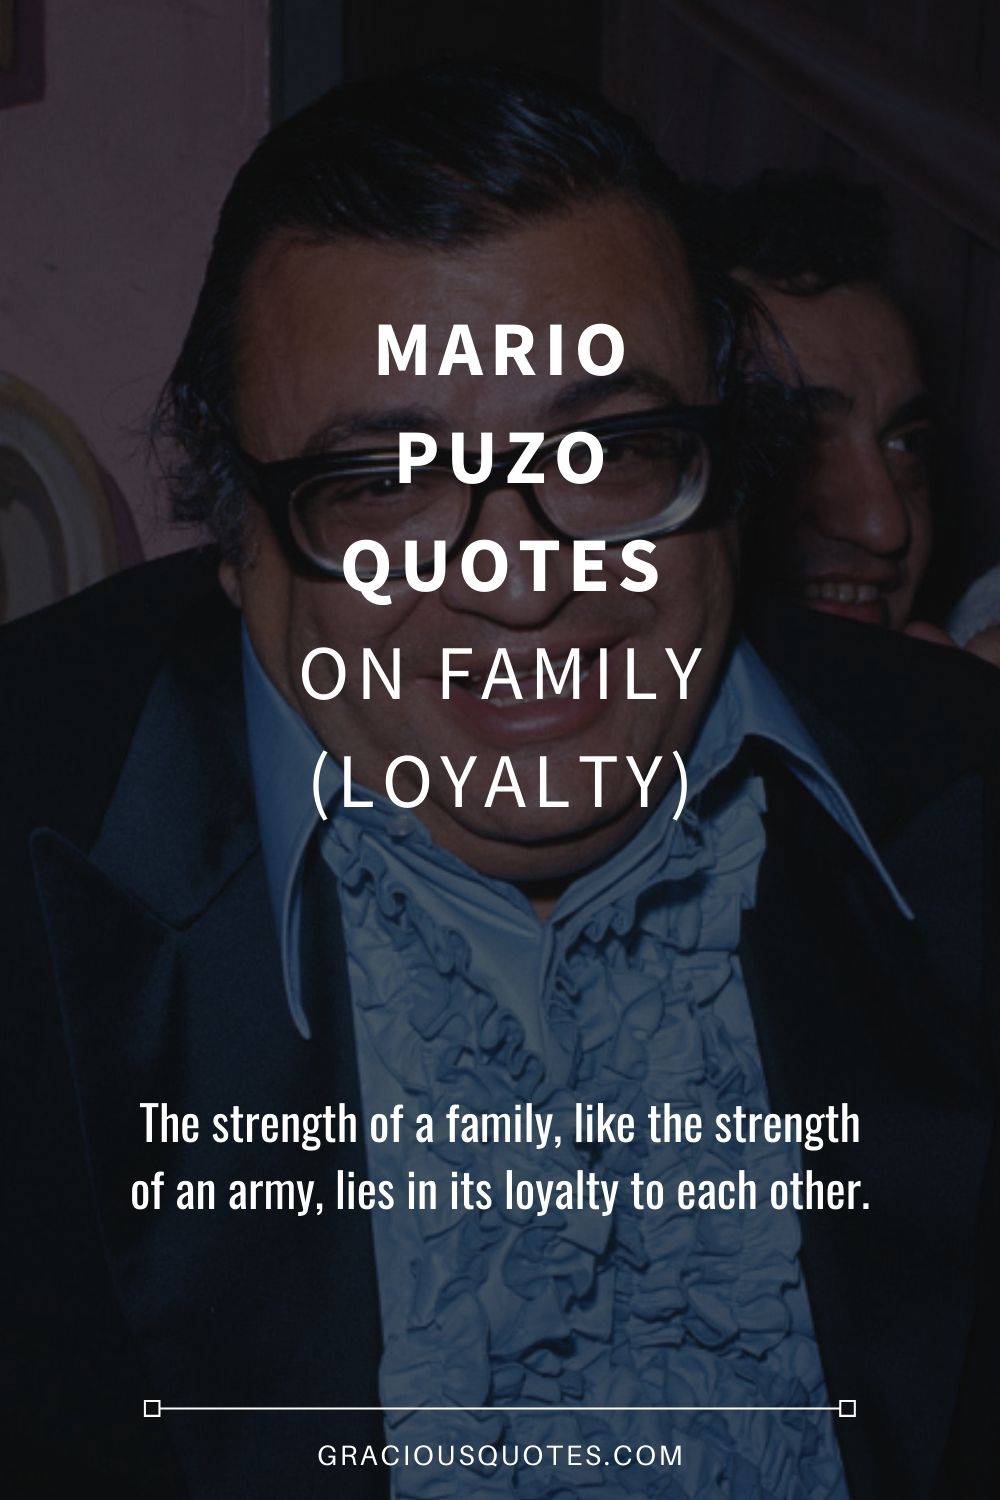 Mario Puzo Quotes on Family (LOYALTY) - Gracious Quotes